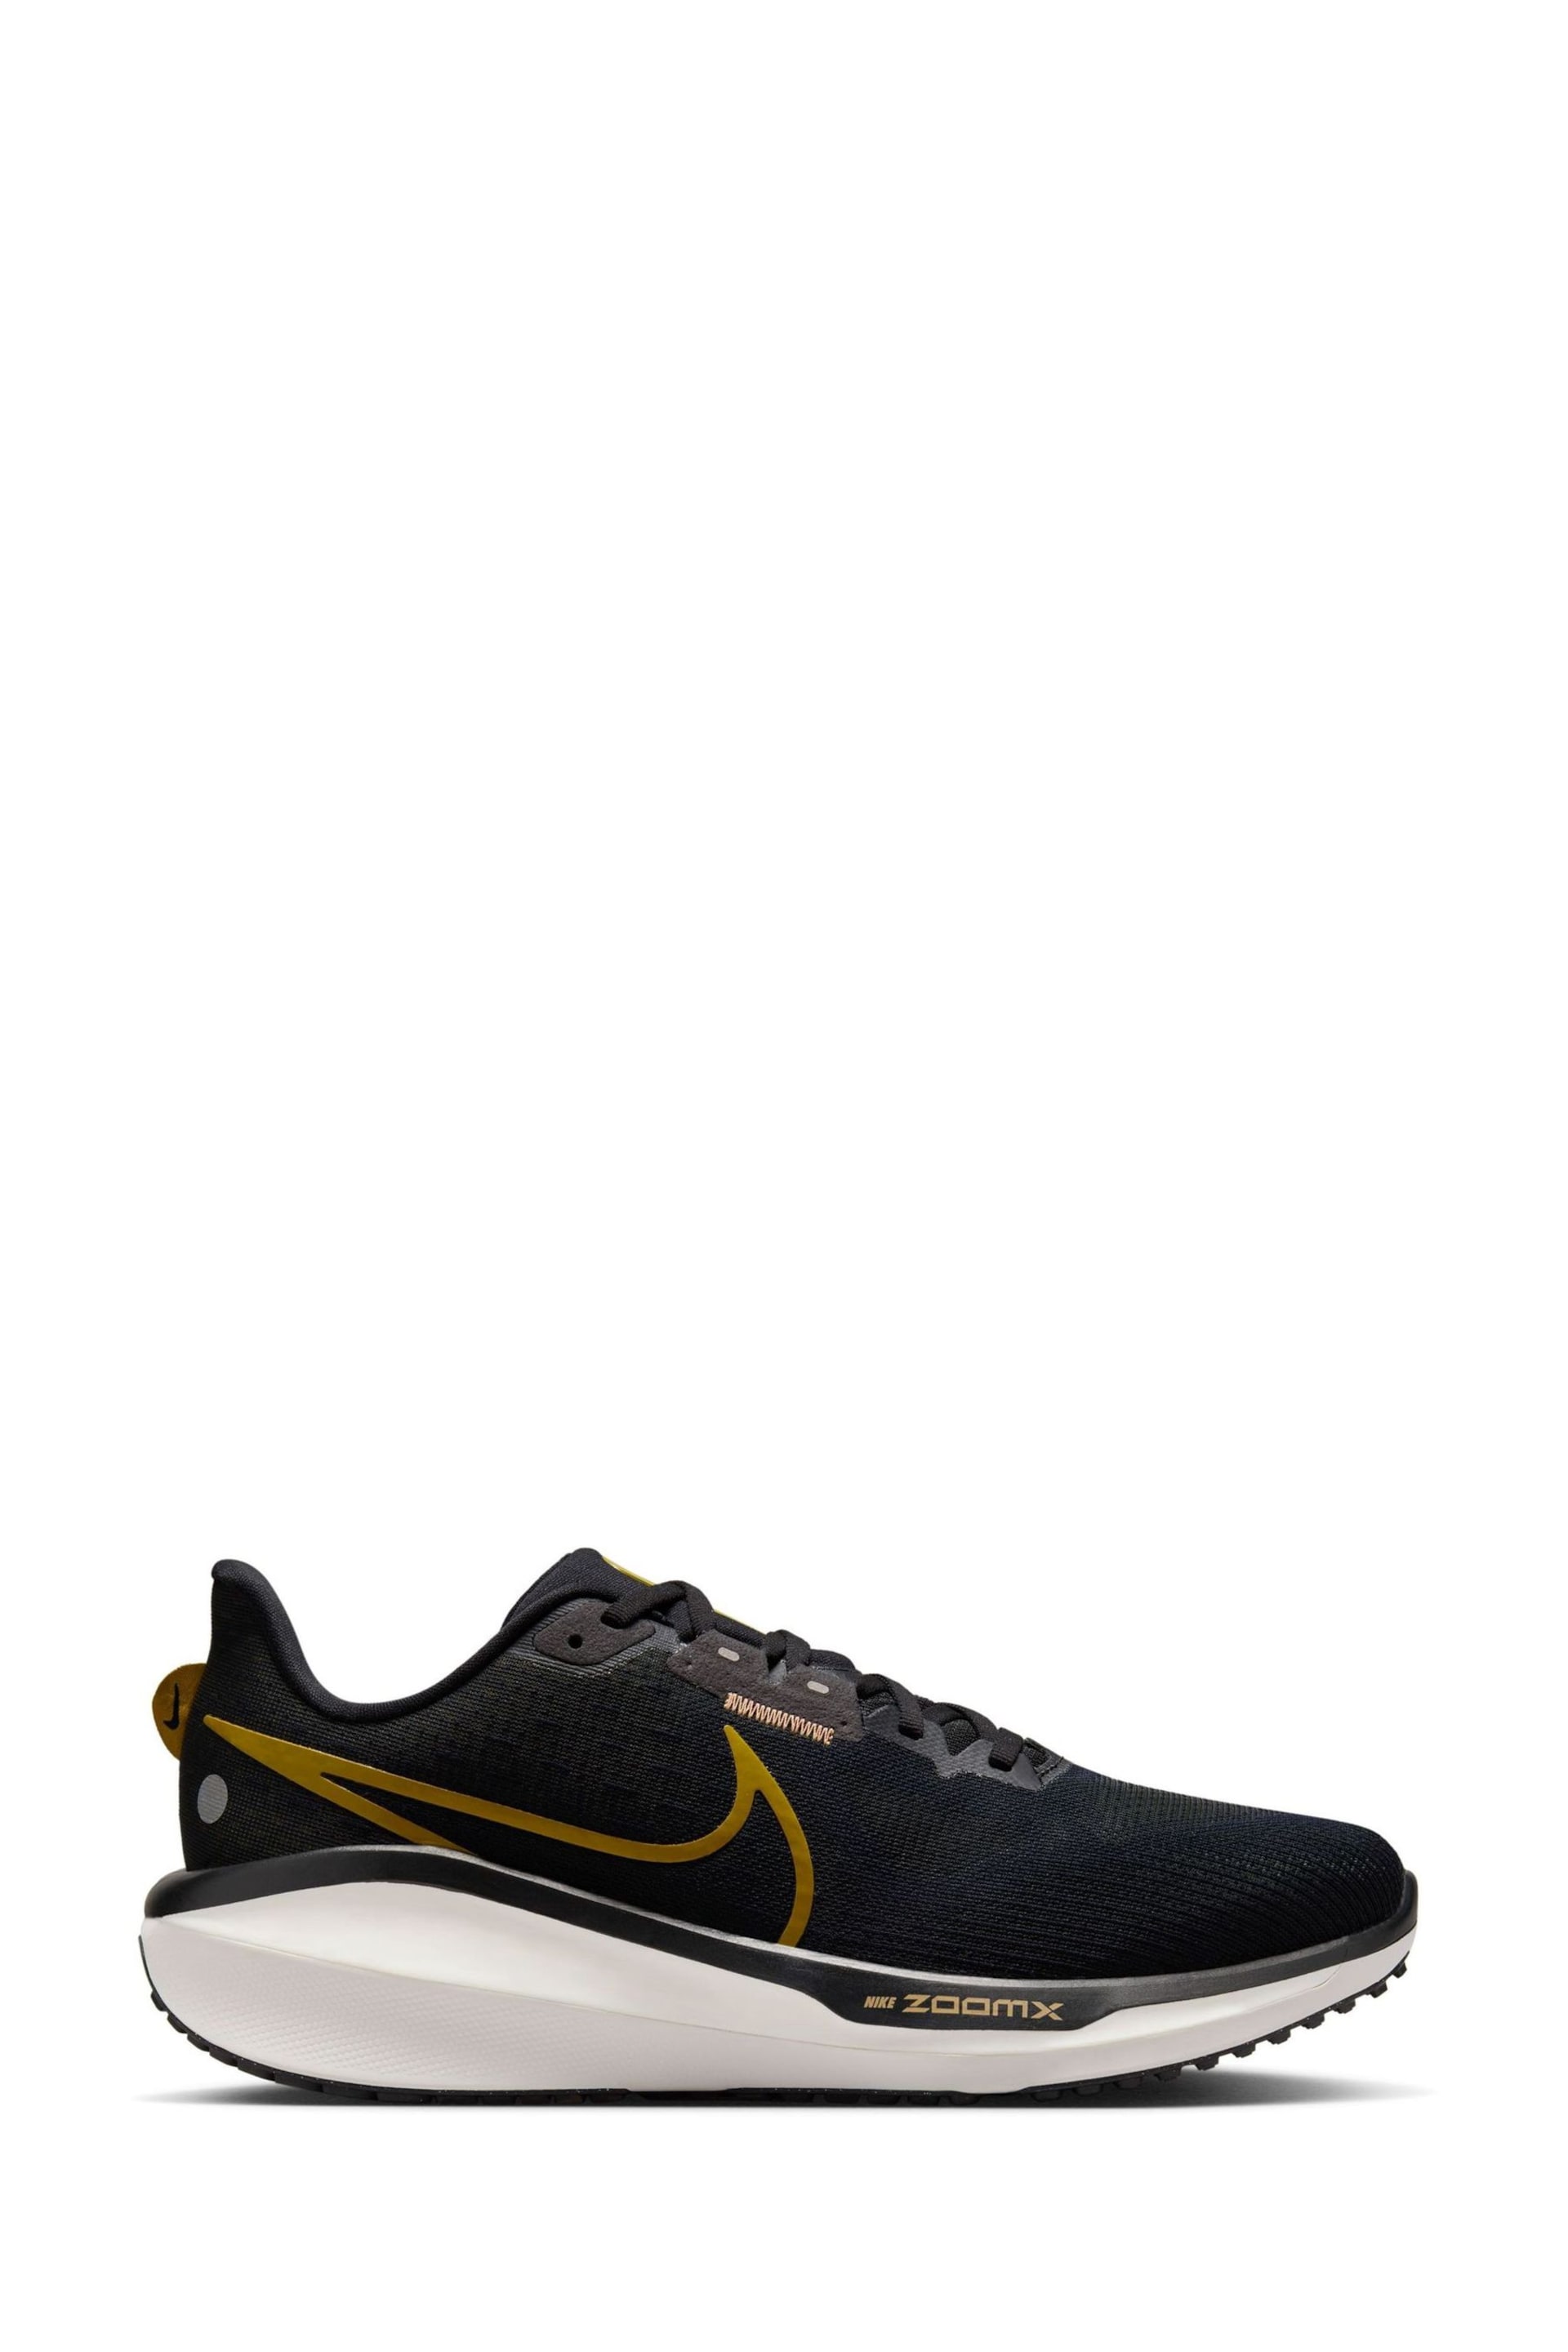 Nike Black/Brown Vomero 17 Road Running Trainers - Image 1 of 8